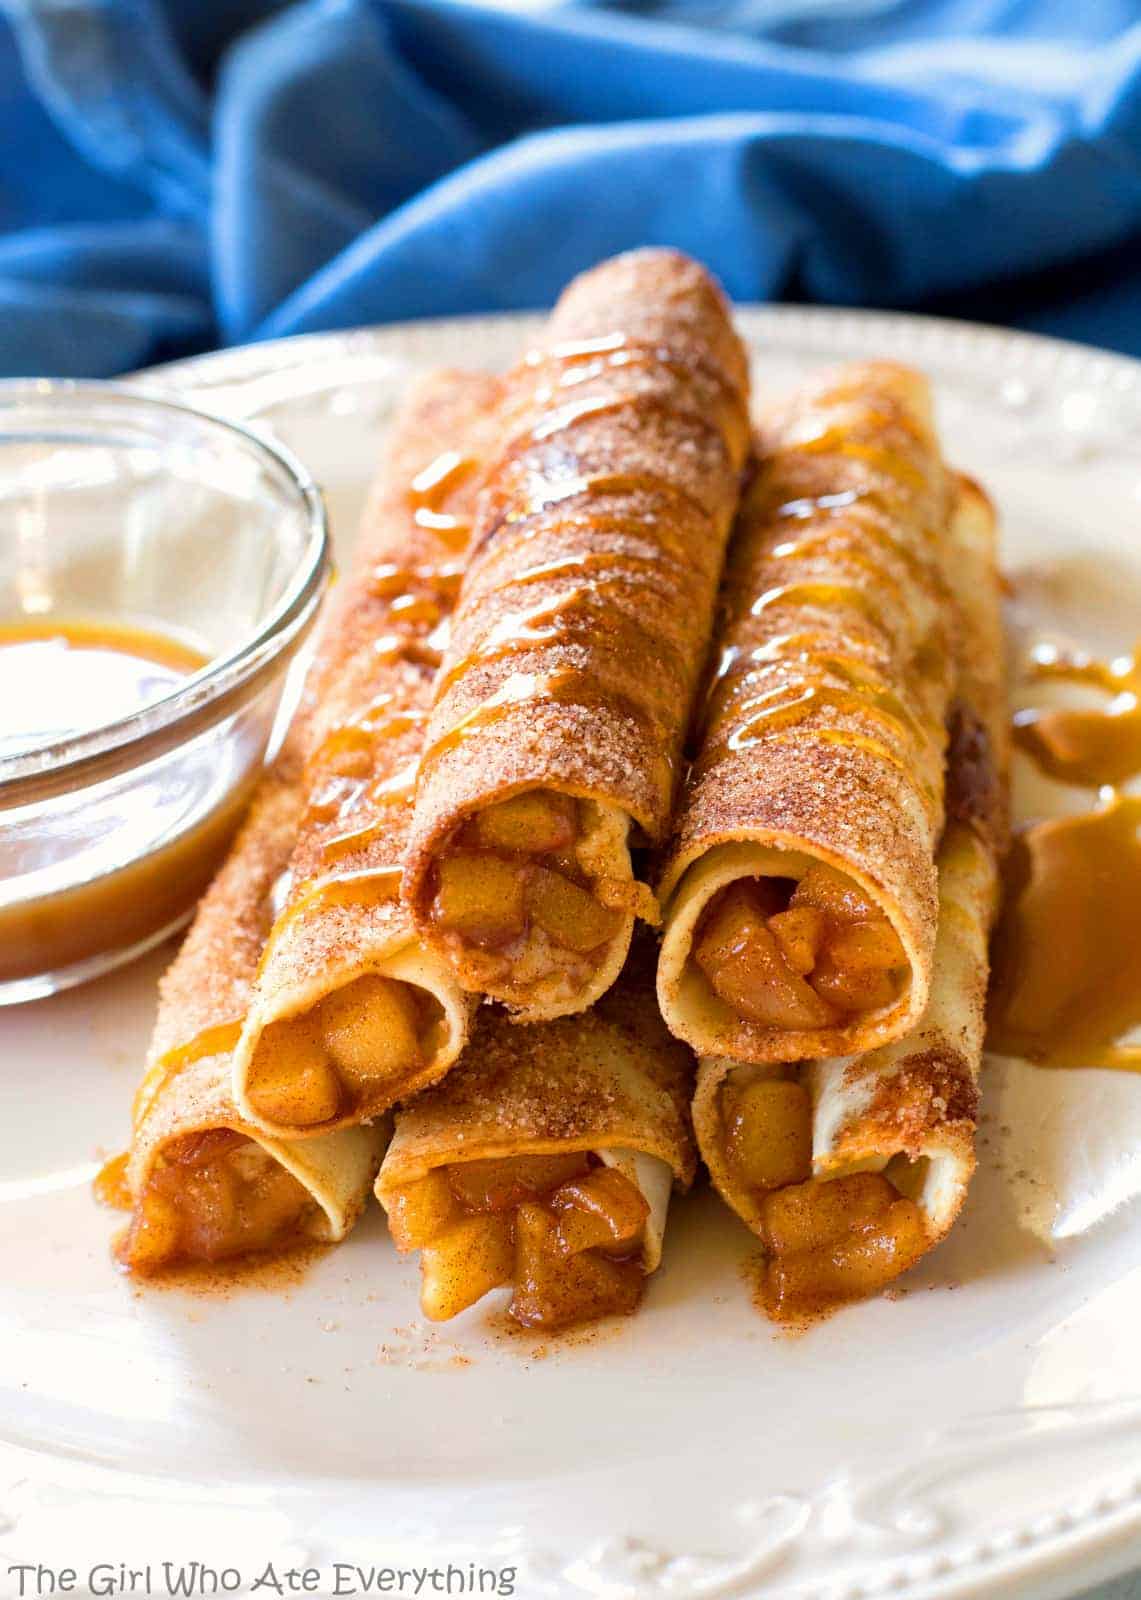 Taquitos Creamy (VIDEO) Apple Caramel Girl Who Everything - Ate The